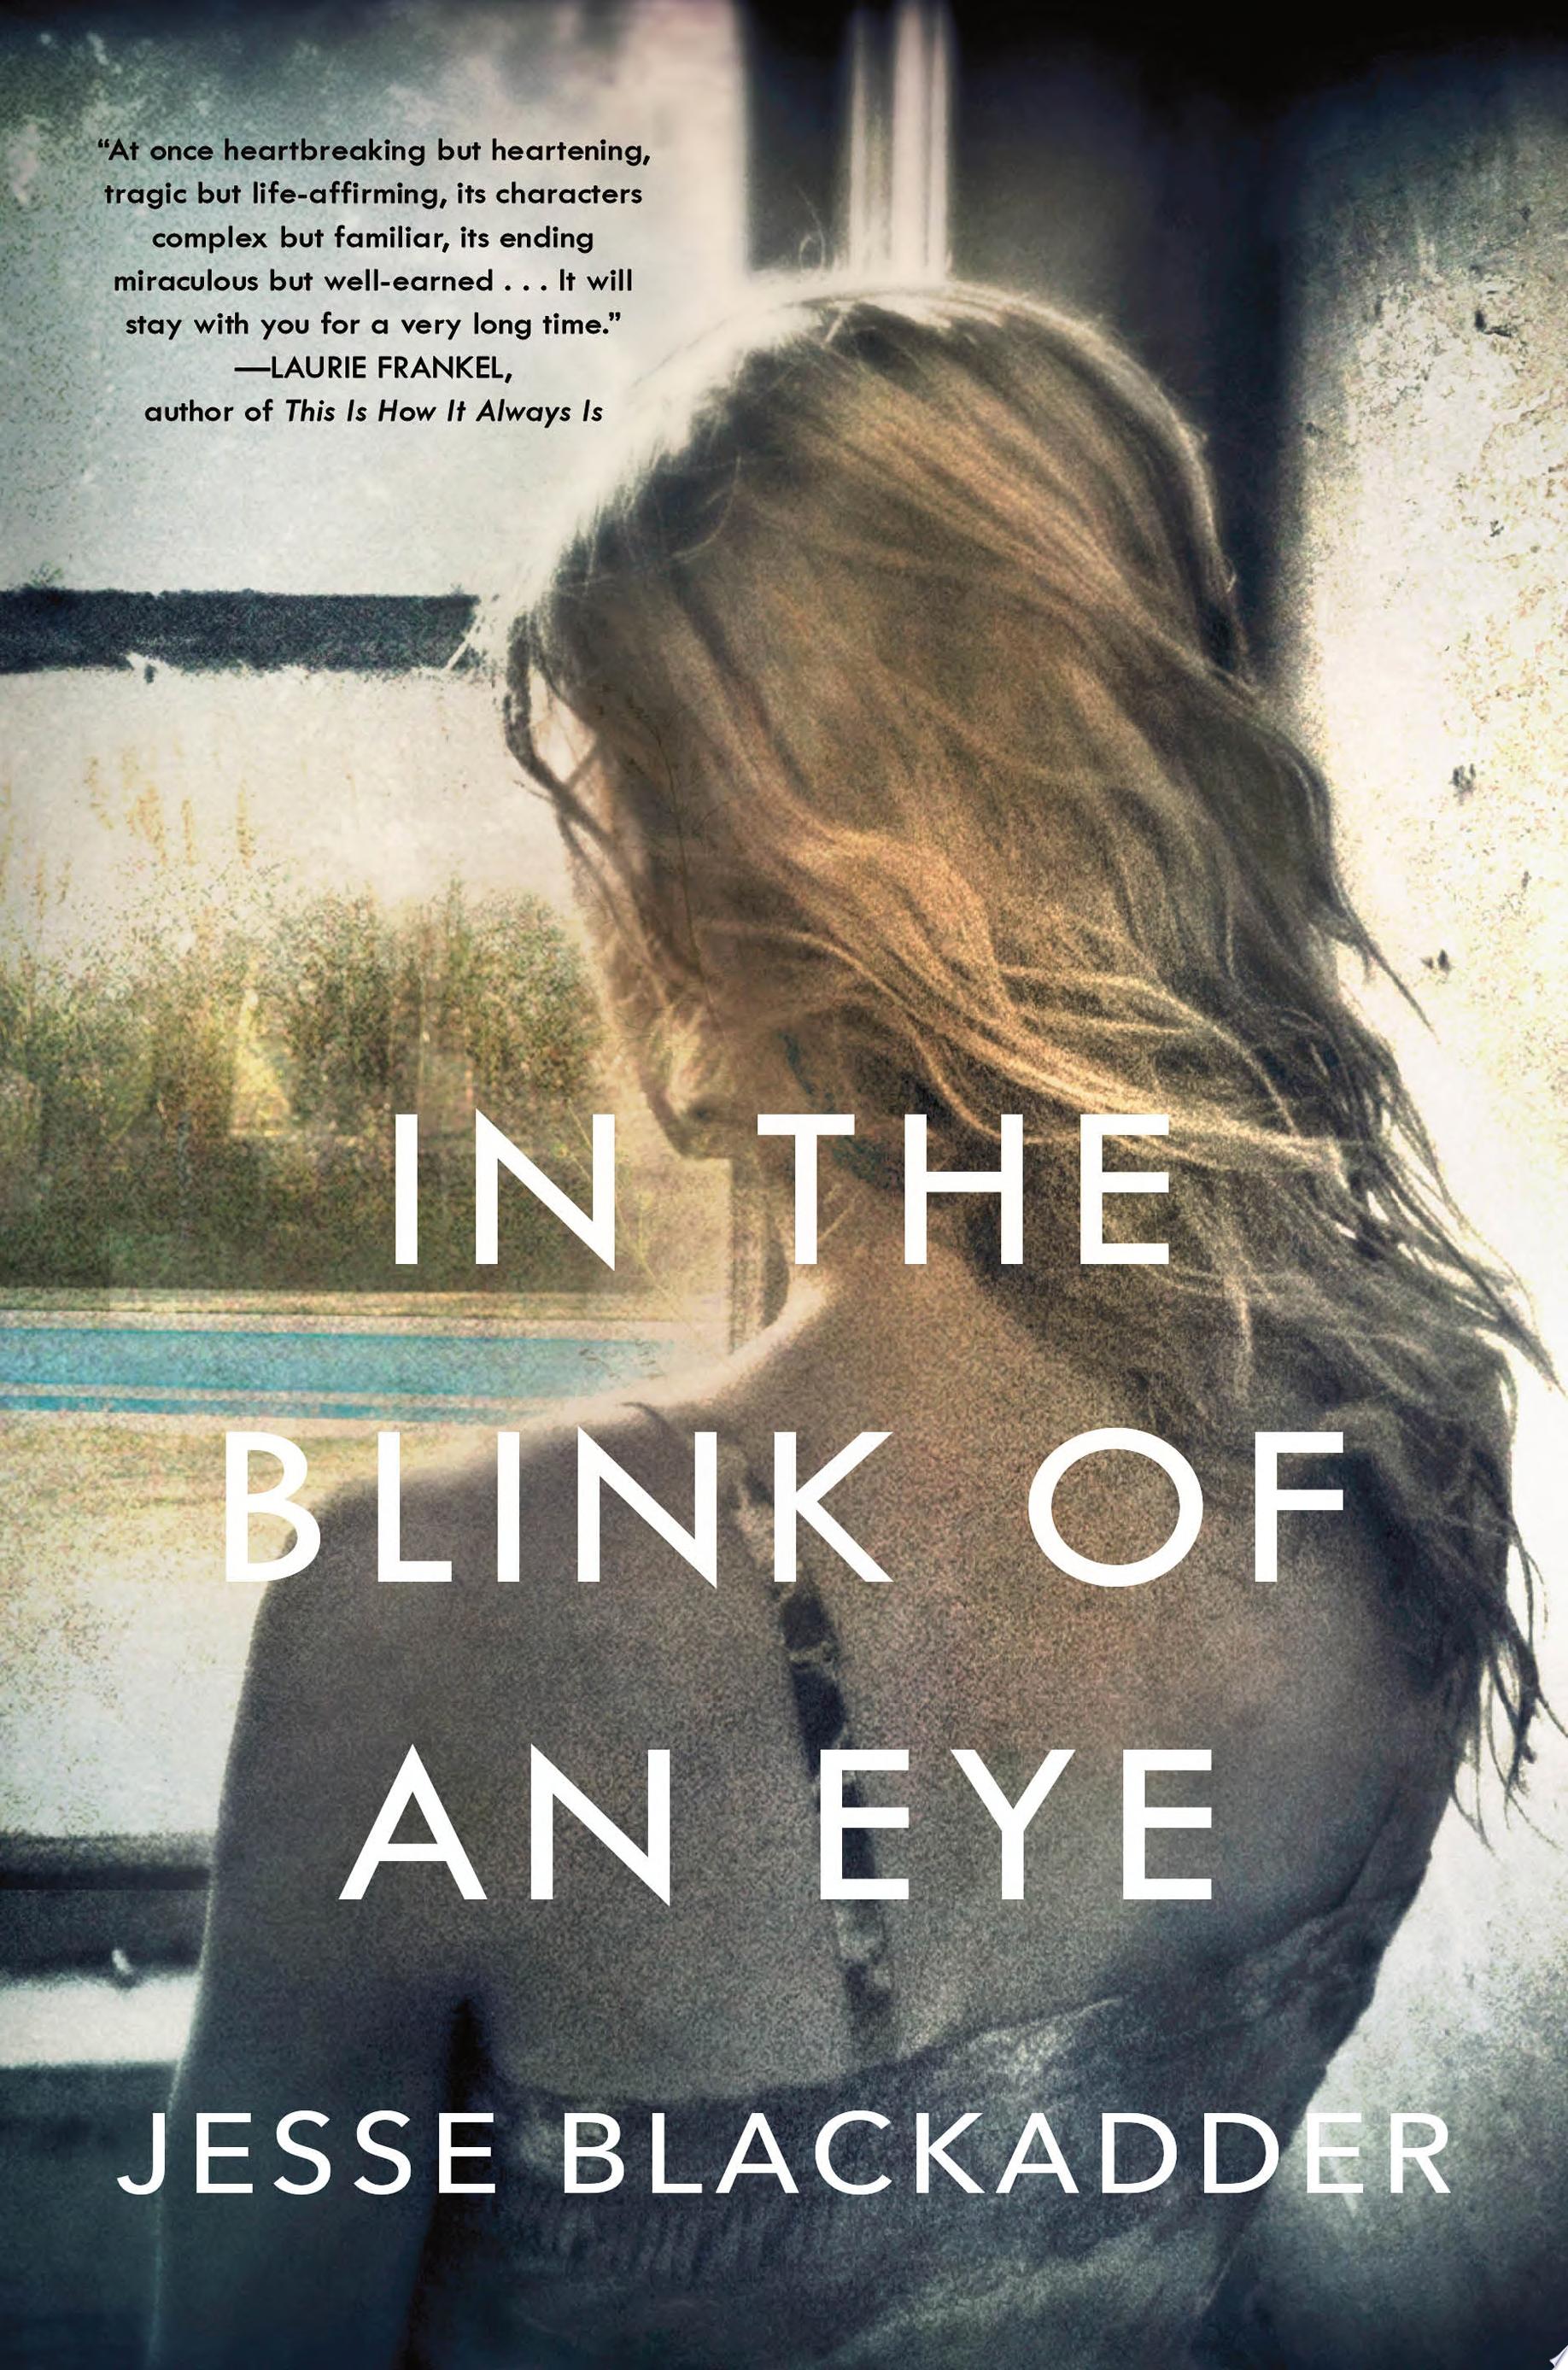 Image for "In the Blink of an Eye"